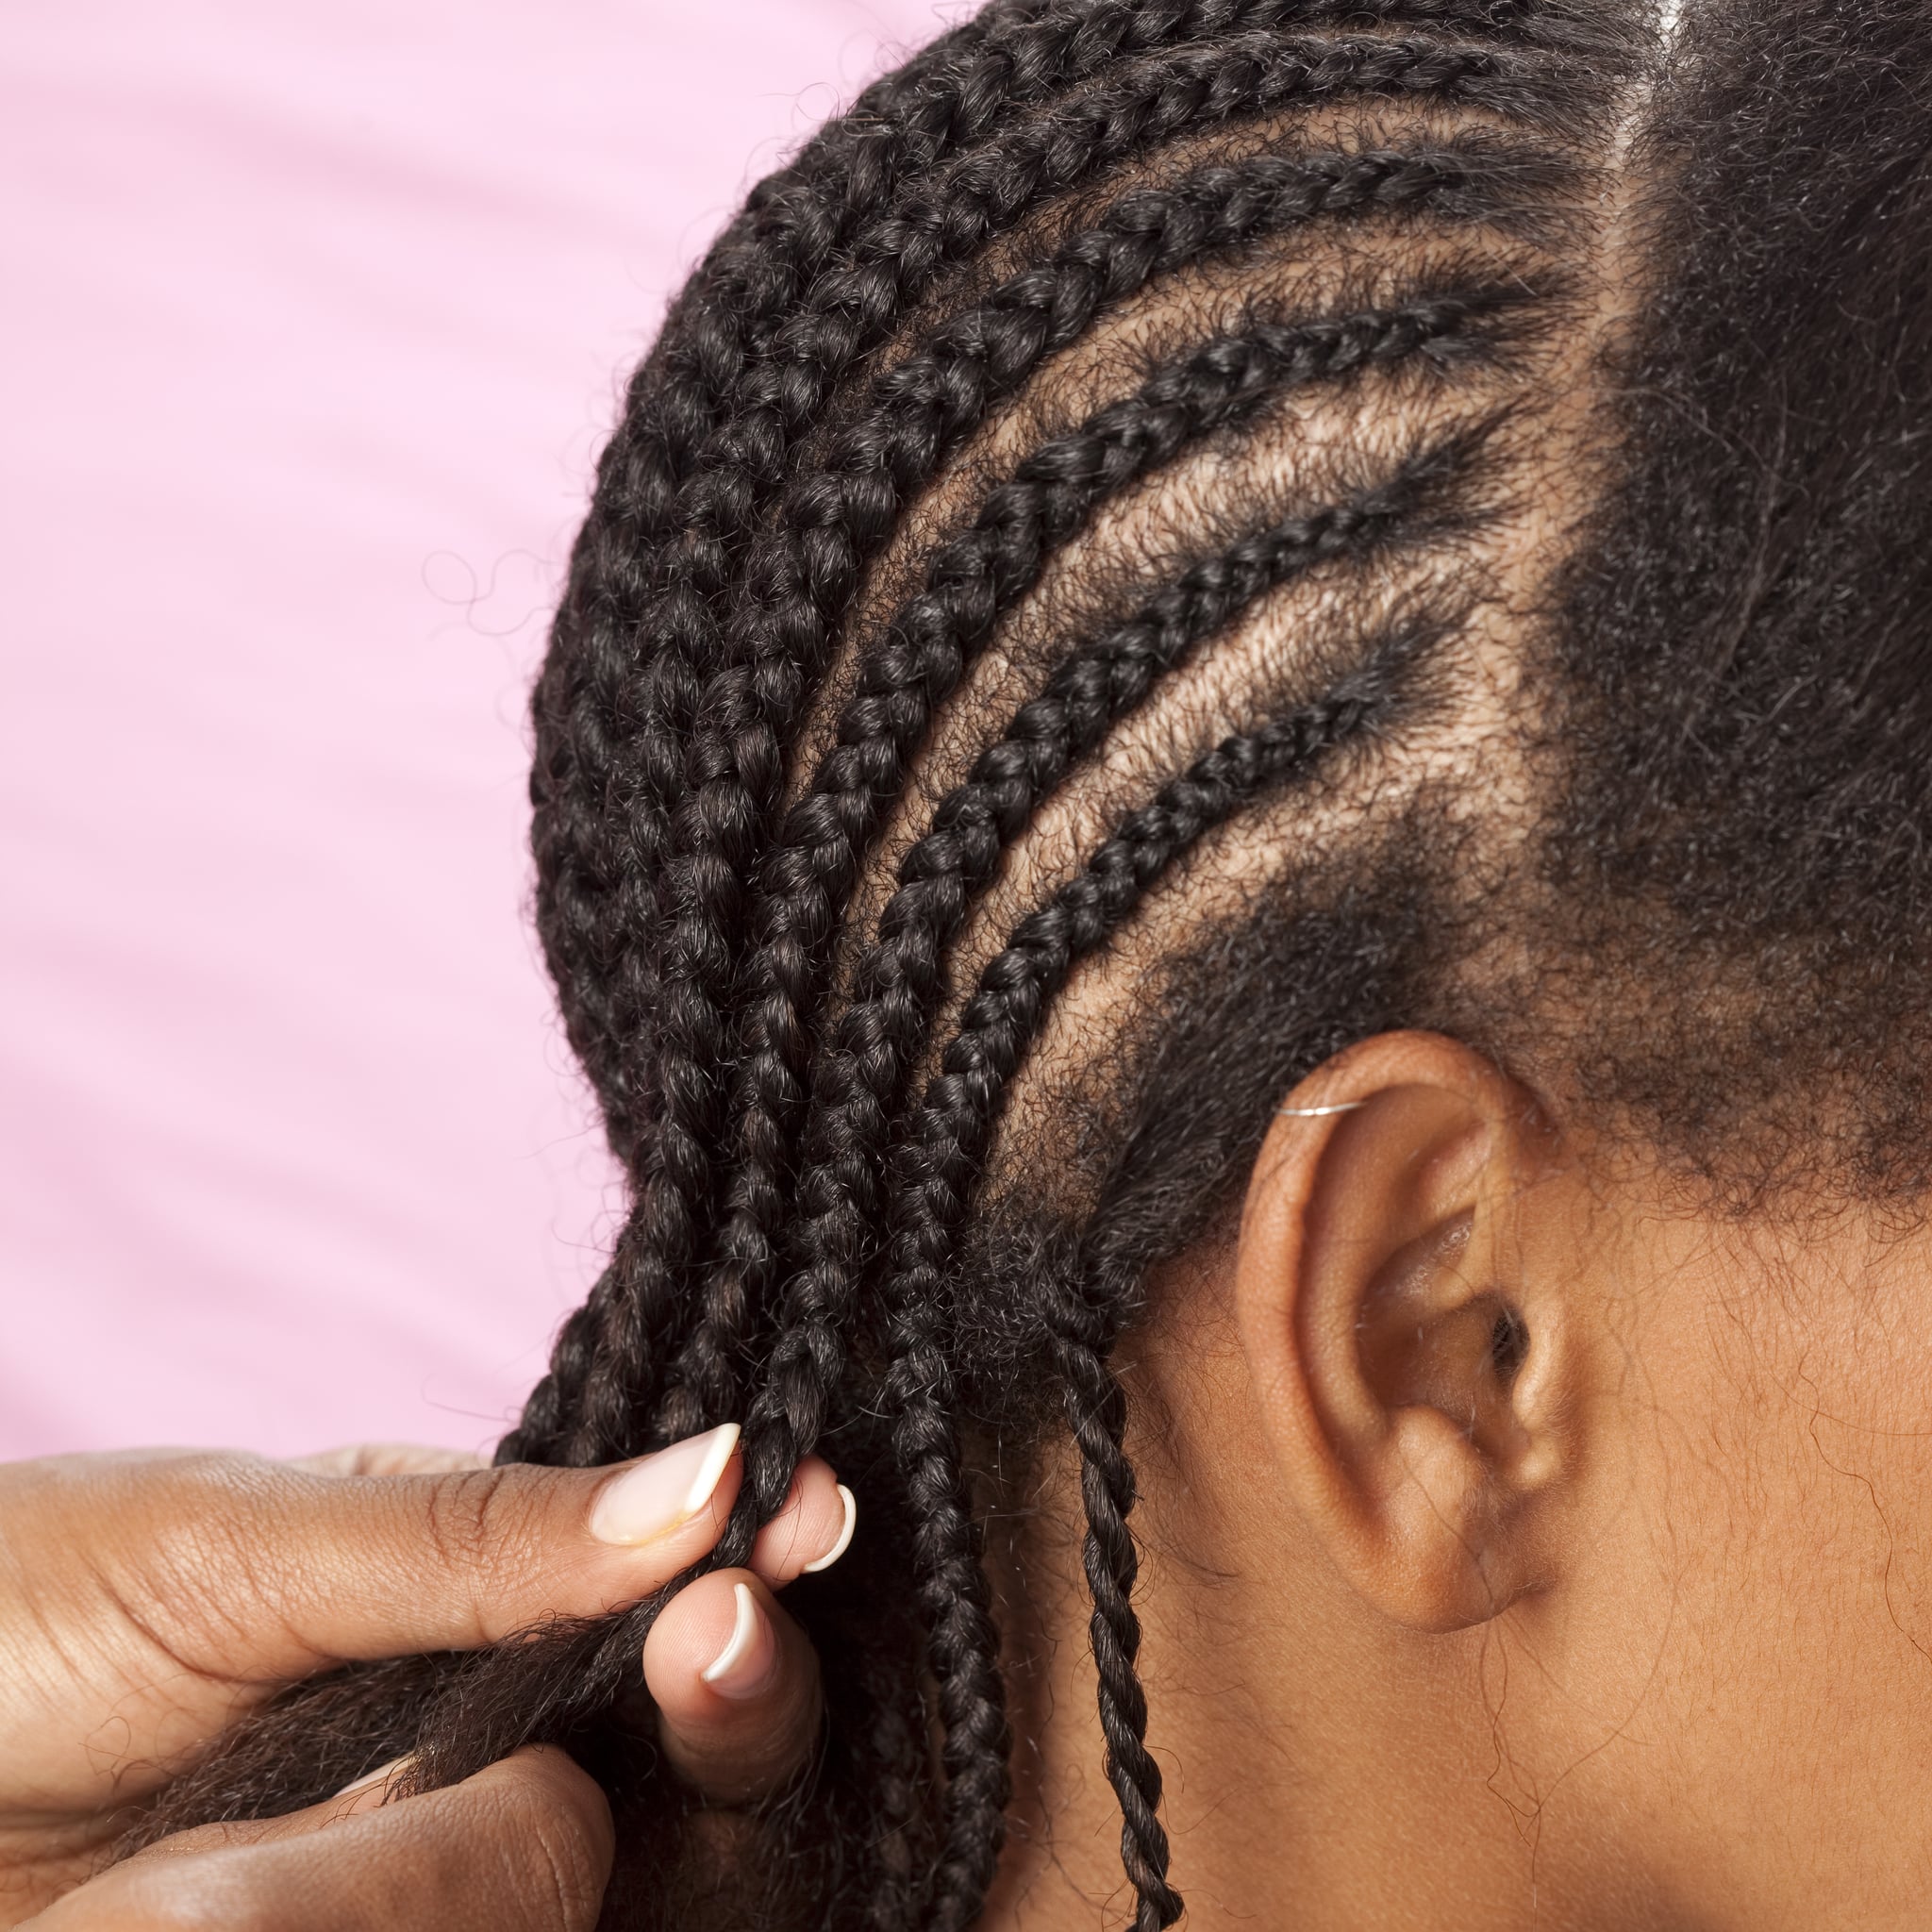 How to Maintain Your Cornrows, According to Hairstylists | POPSUGAR Beauty